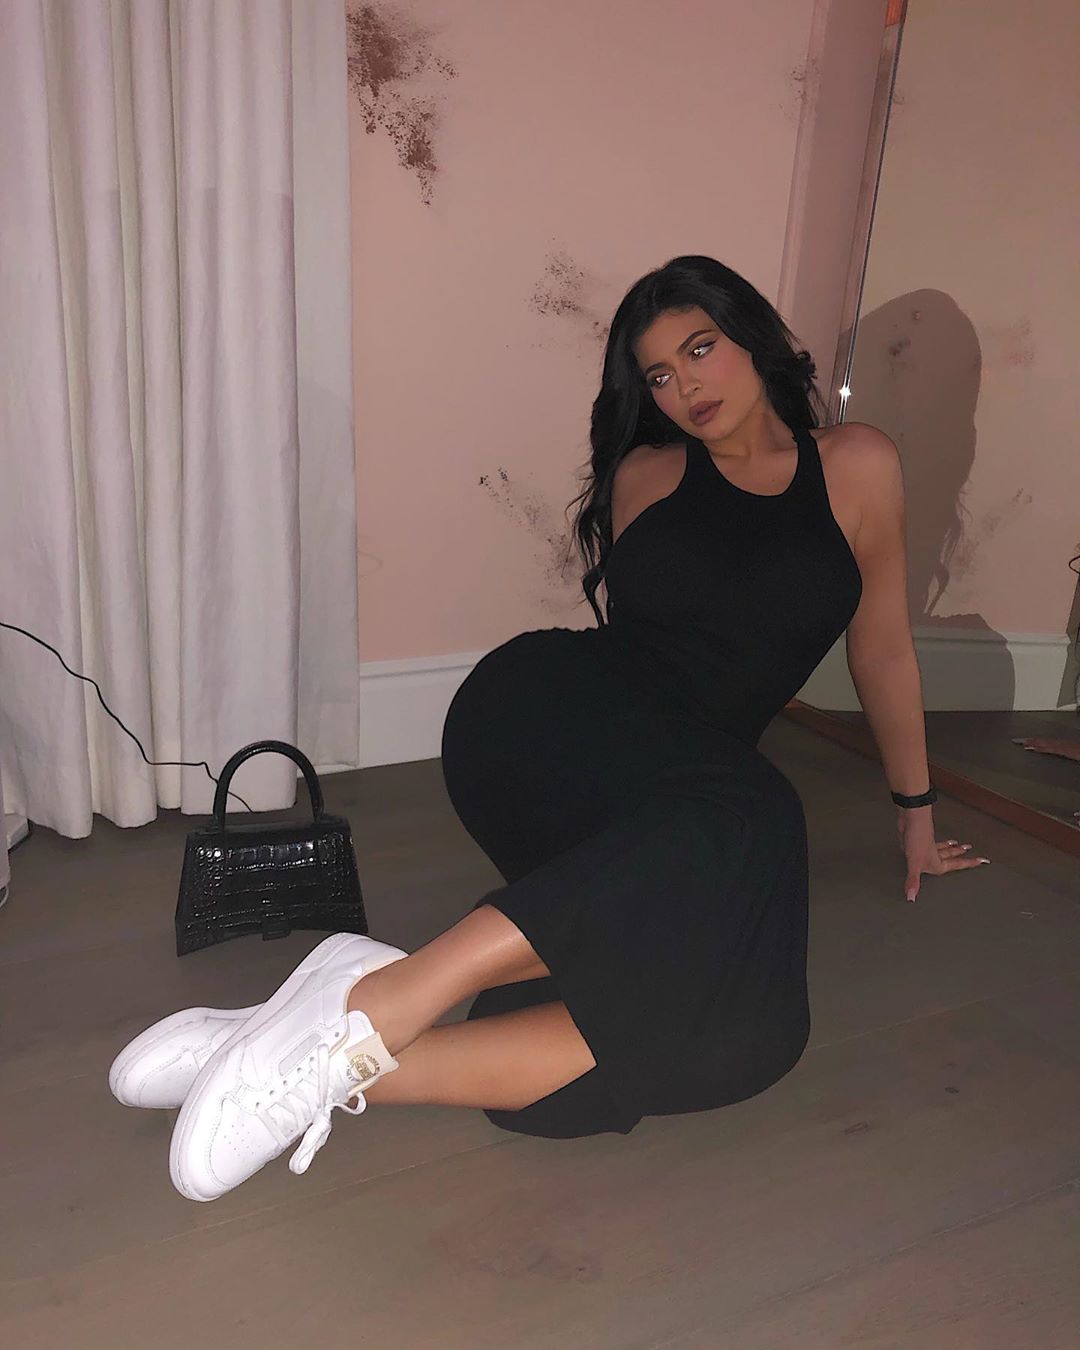 Video - Kylie Jenner shows what she carries inside her Birkin